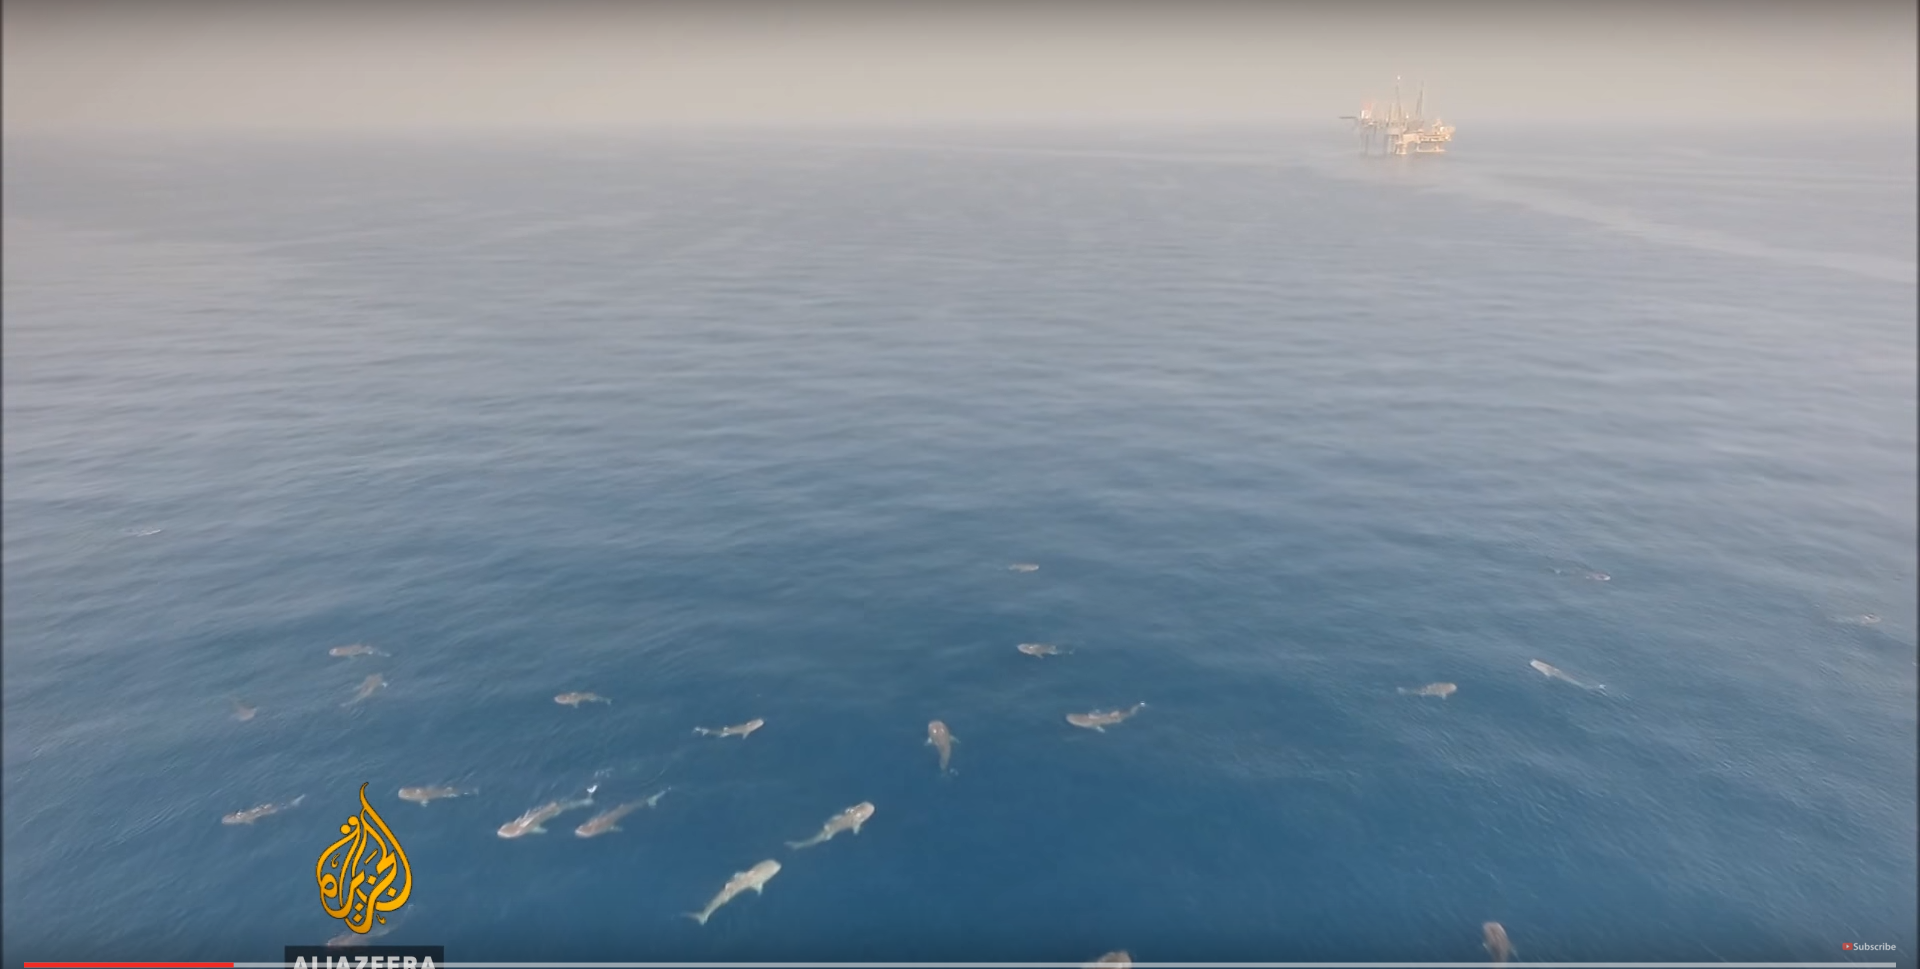 Whale Sharks have been congregating close to the Al Shaheen oil field